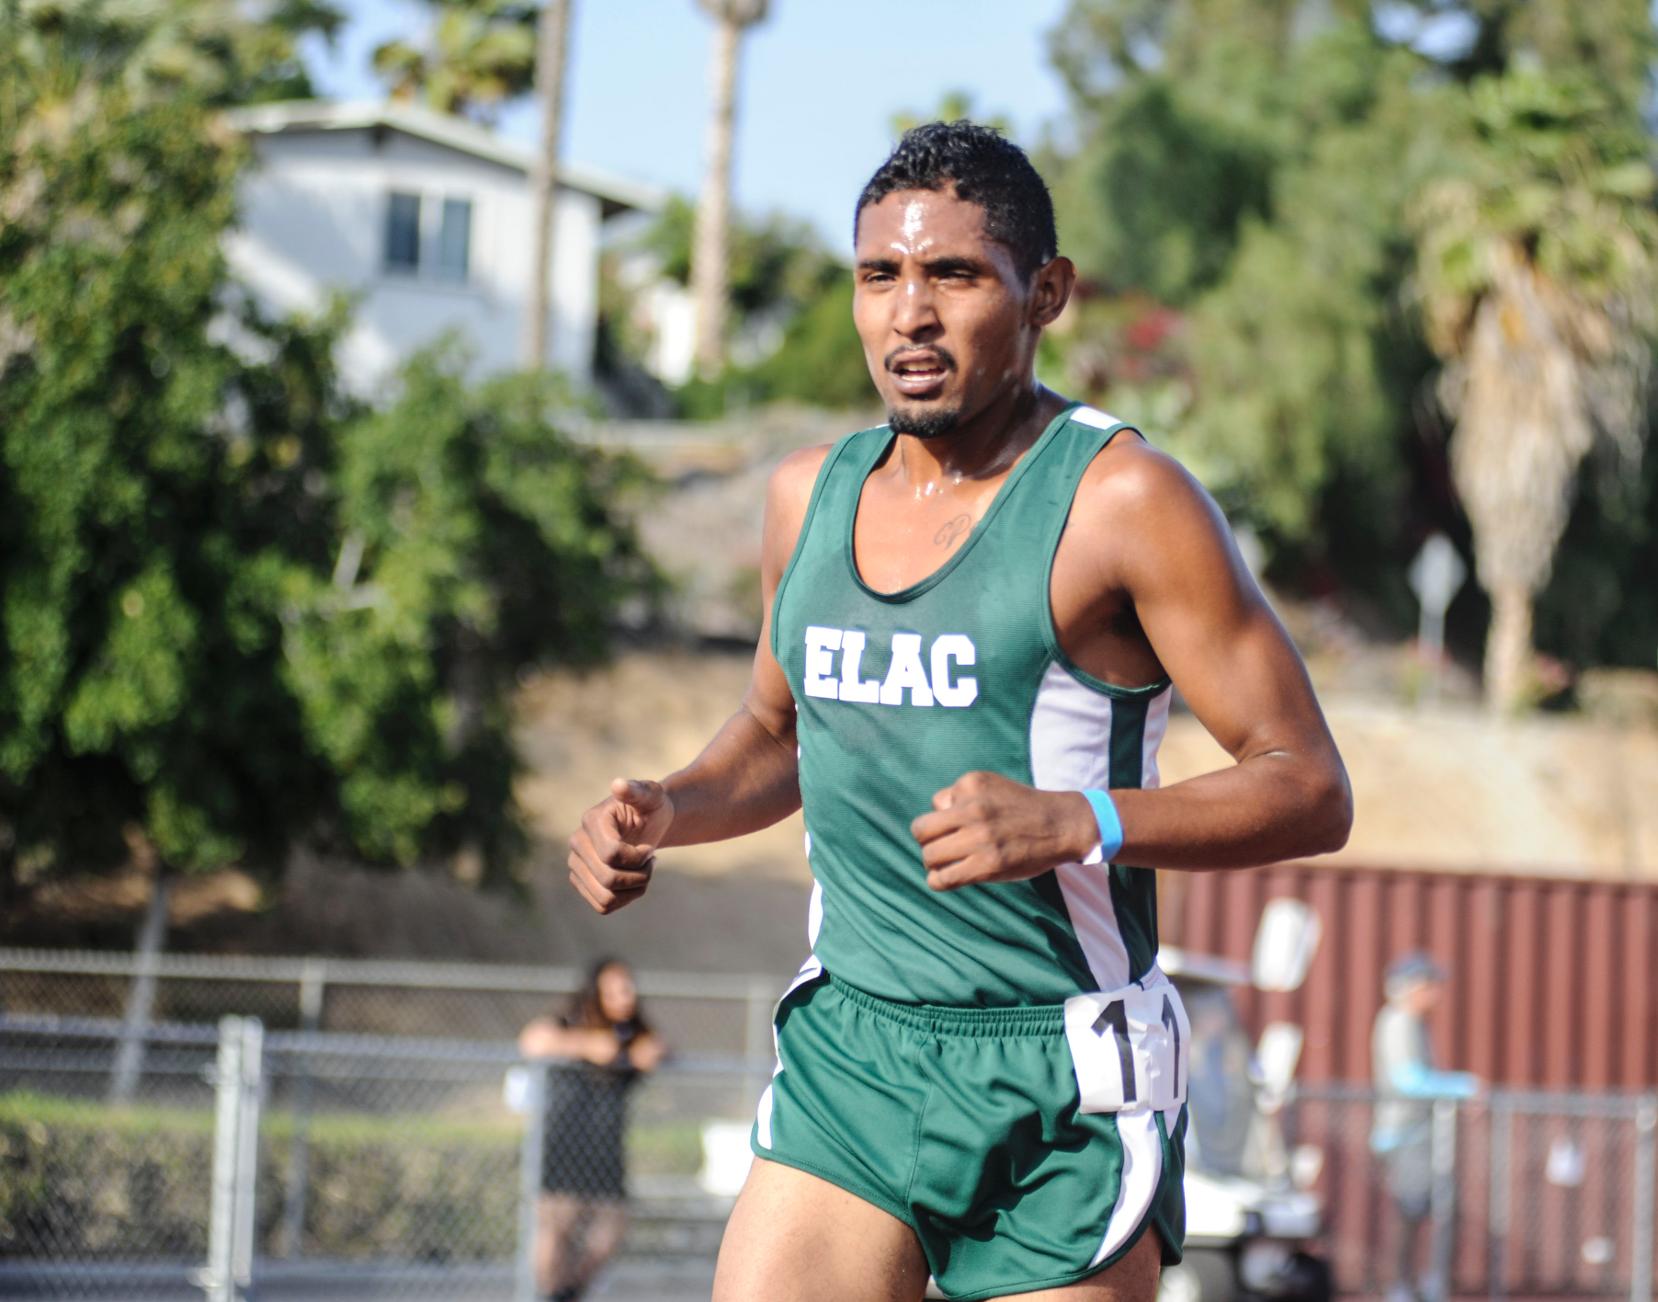 ELAC All-American Gonzalo Ceja, who is a member of the Cal State LA Track & Field team, is pictured in the 2014 CCCAA SoCal Championships steeplechase run.